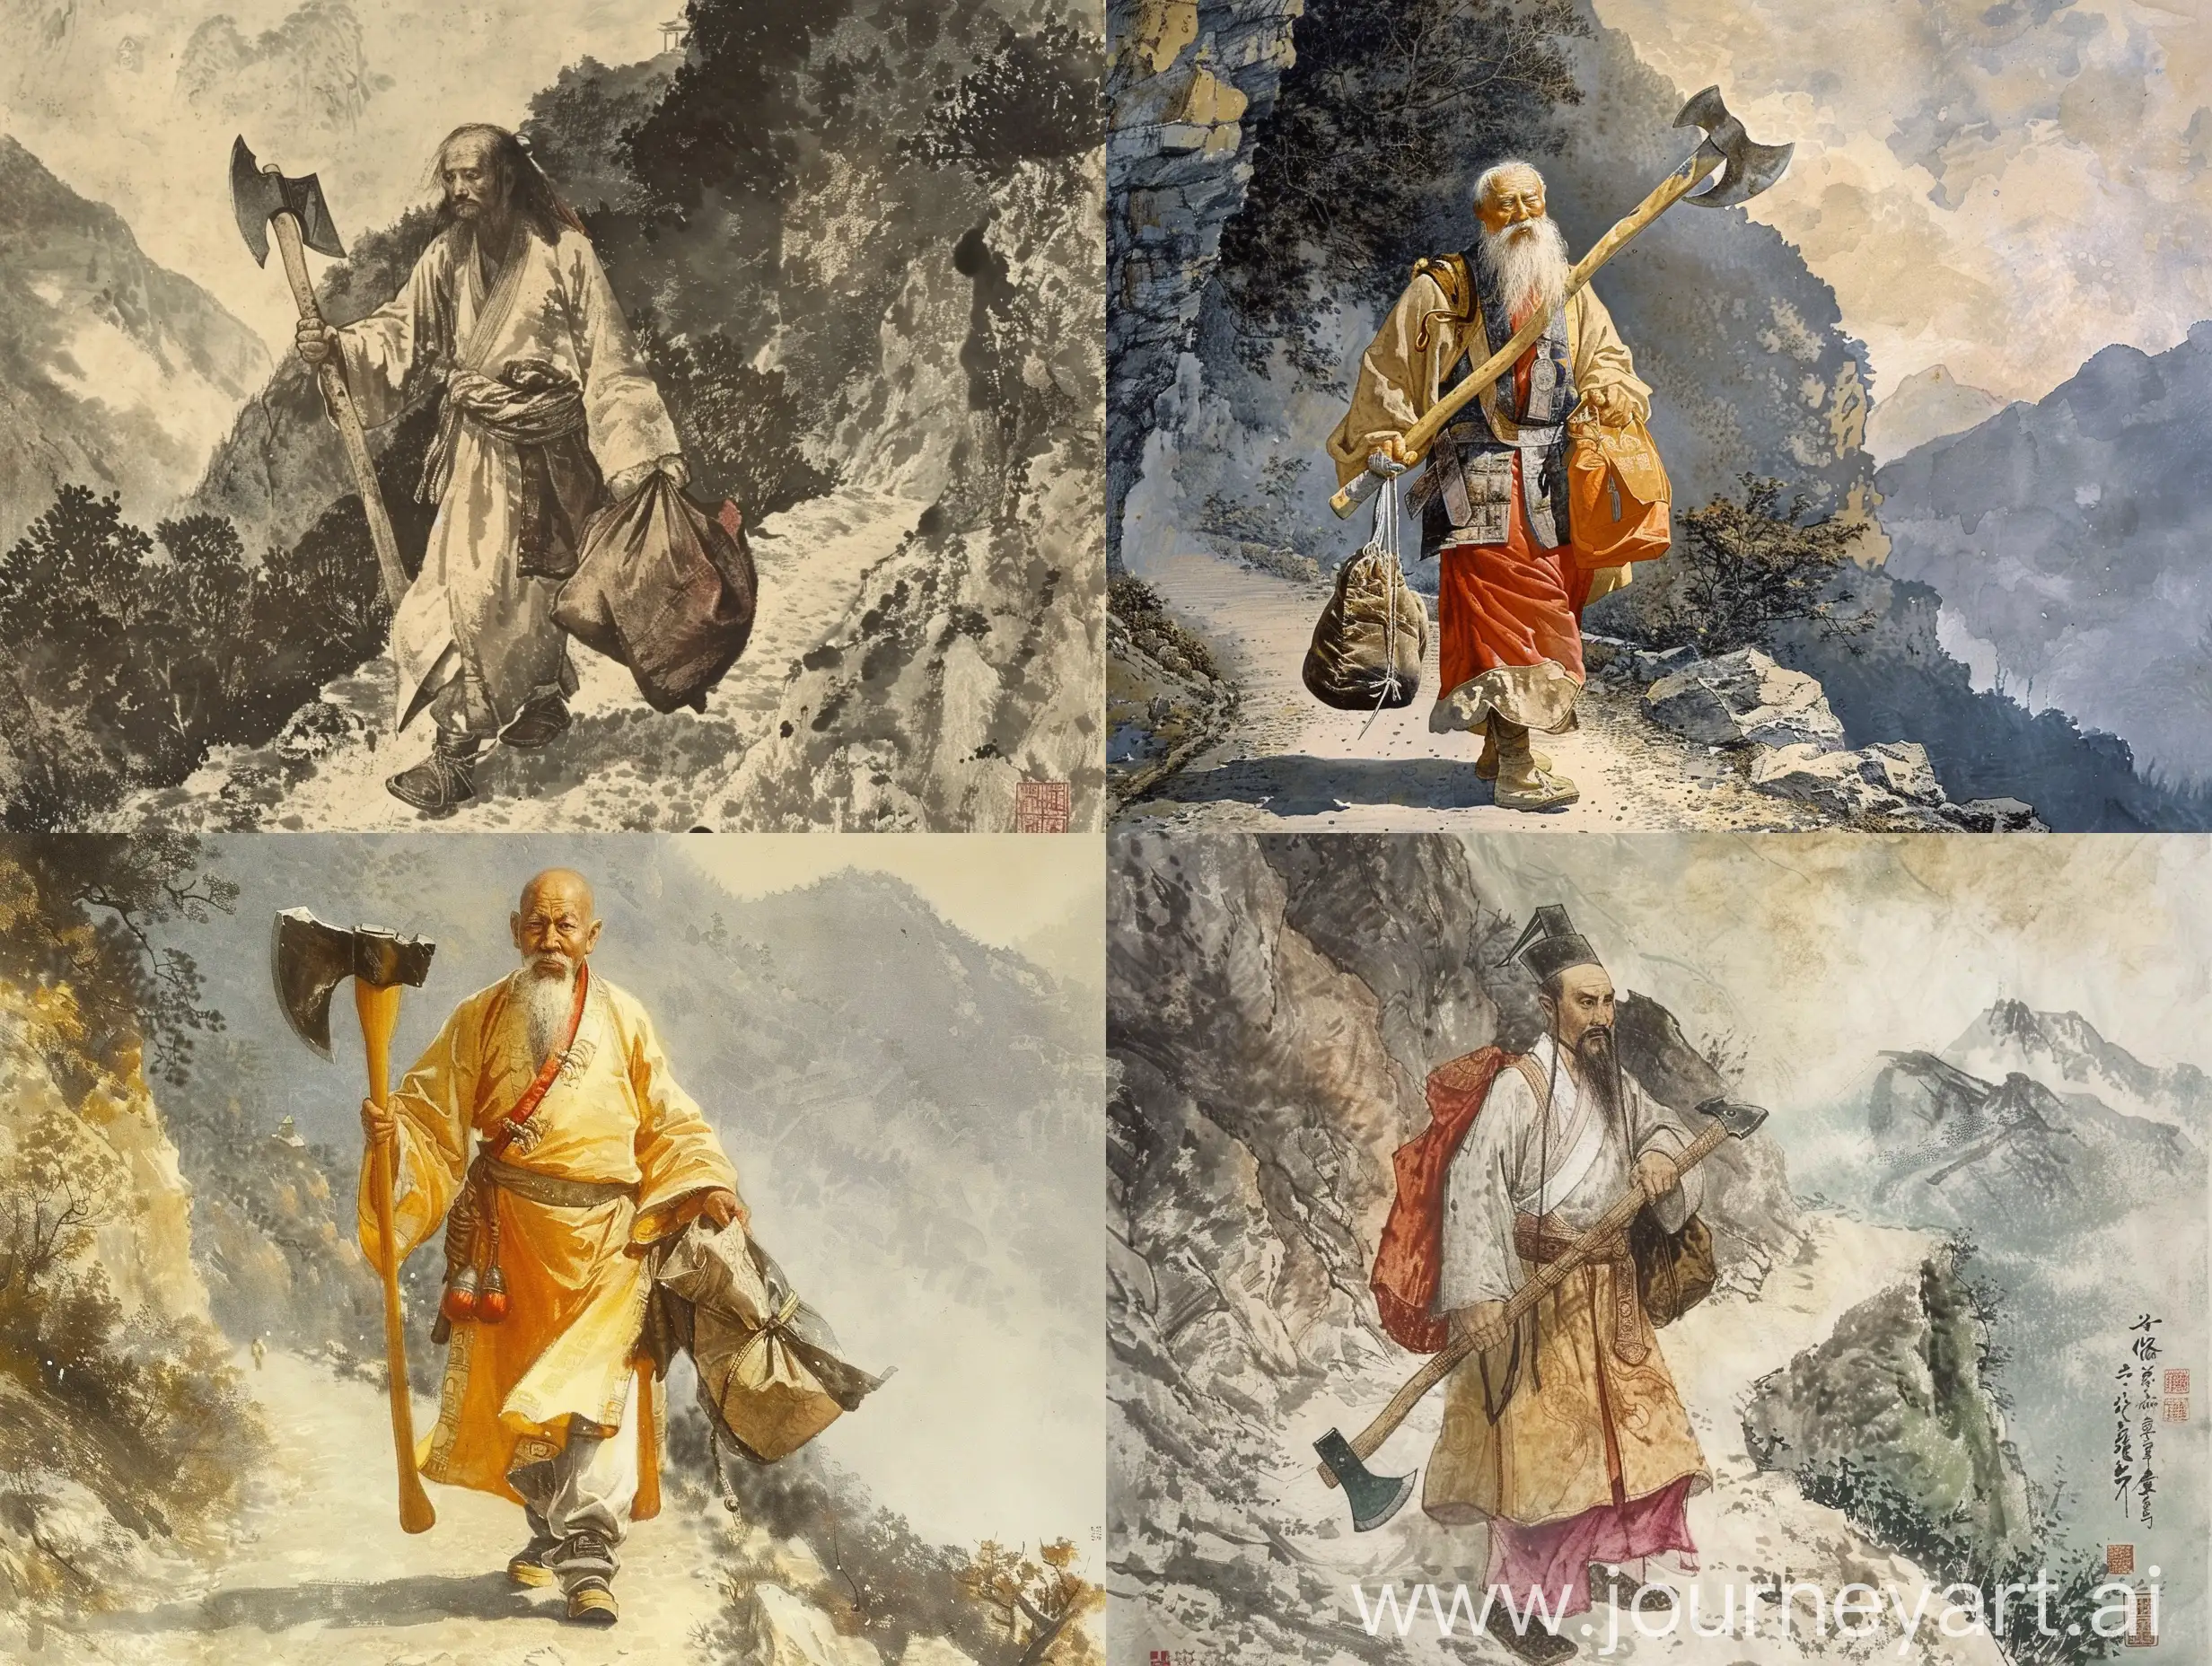 Taoist-Priest-with-Axe-Walking-on-Ancient-Mountain-Road